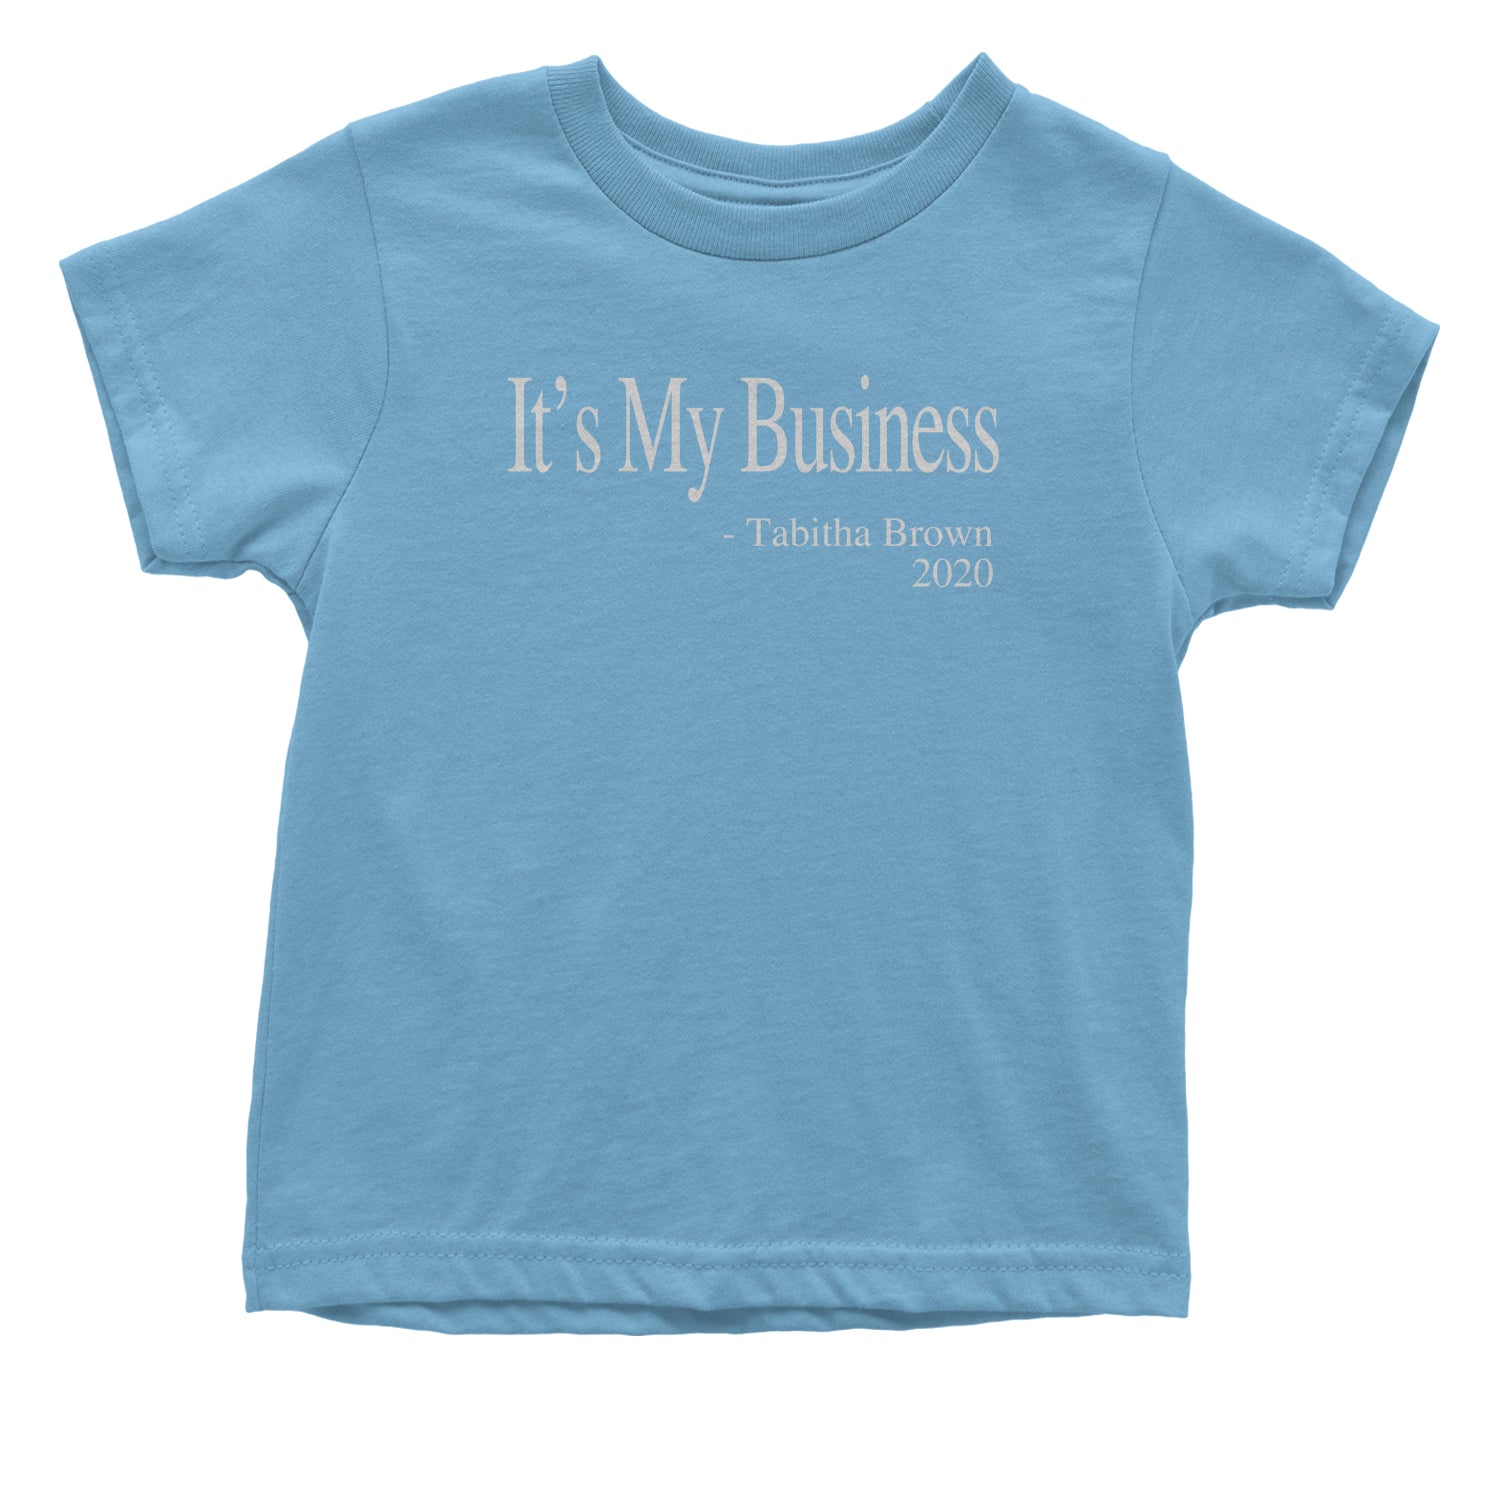 It's My Business Tabitha Brown Quote Toddler T-Shirt brown, feeding, soul, tabitha, the by Expression Tees